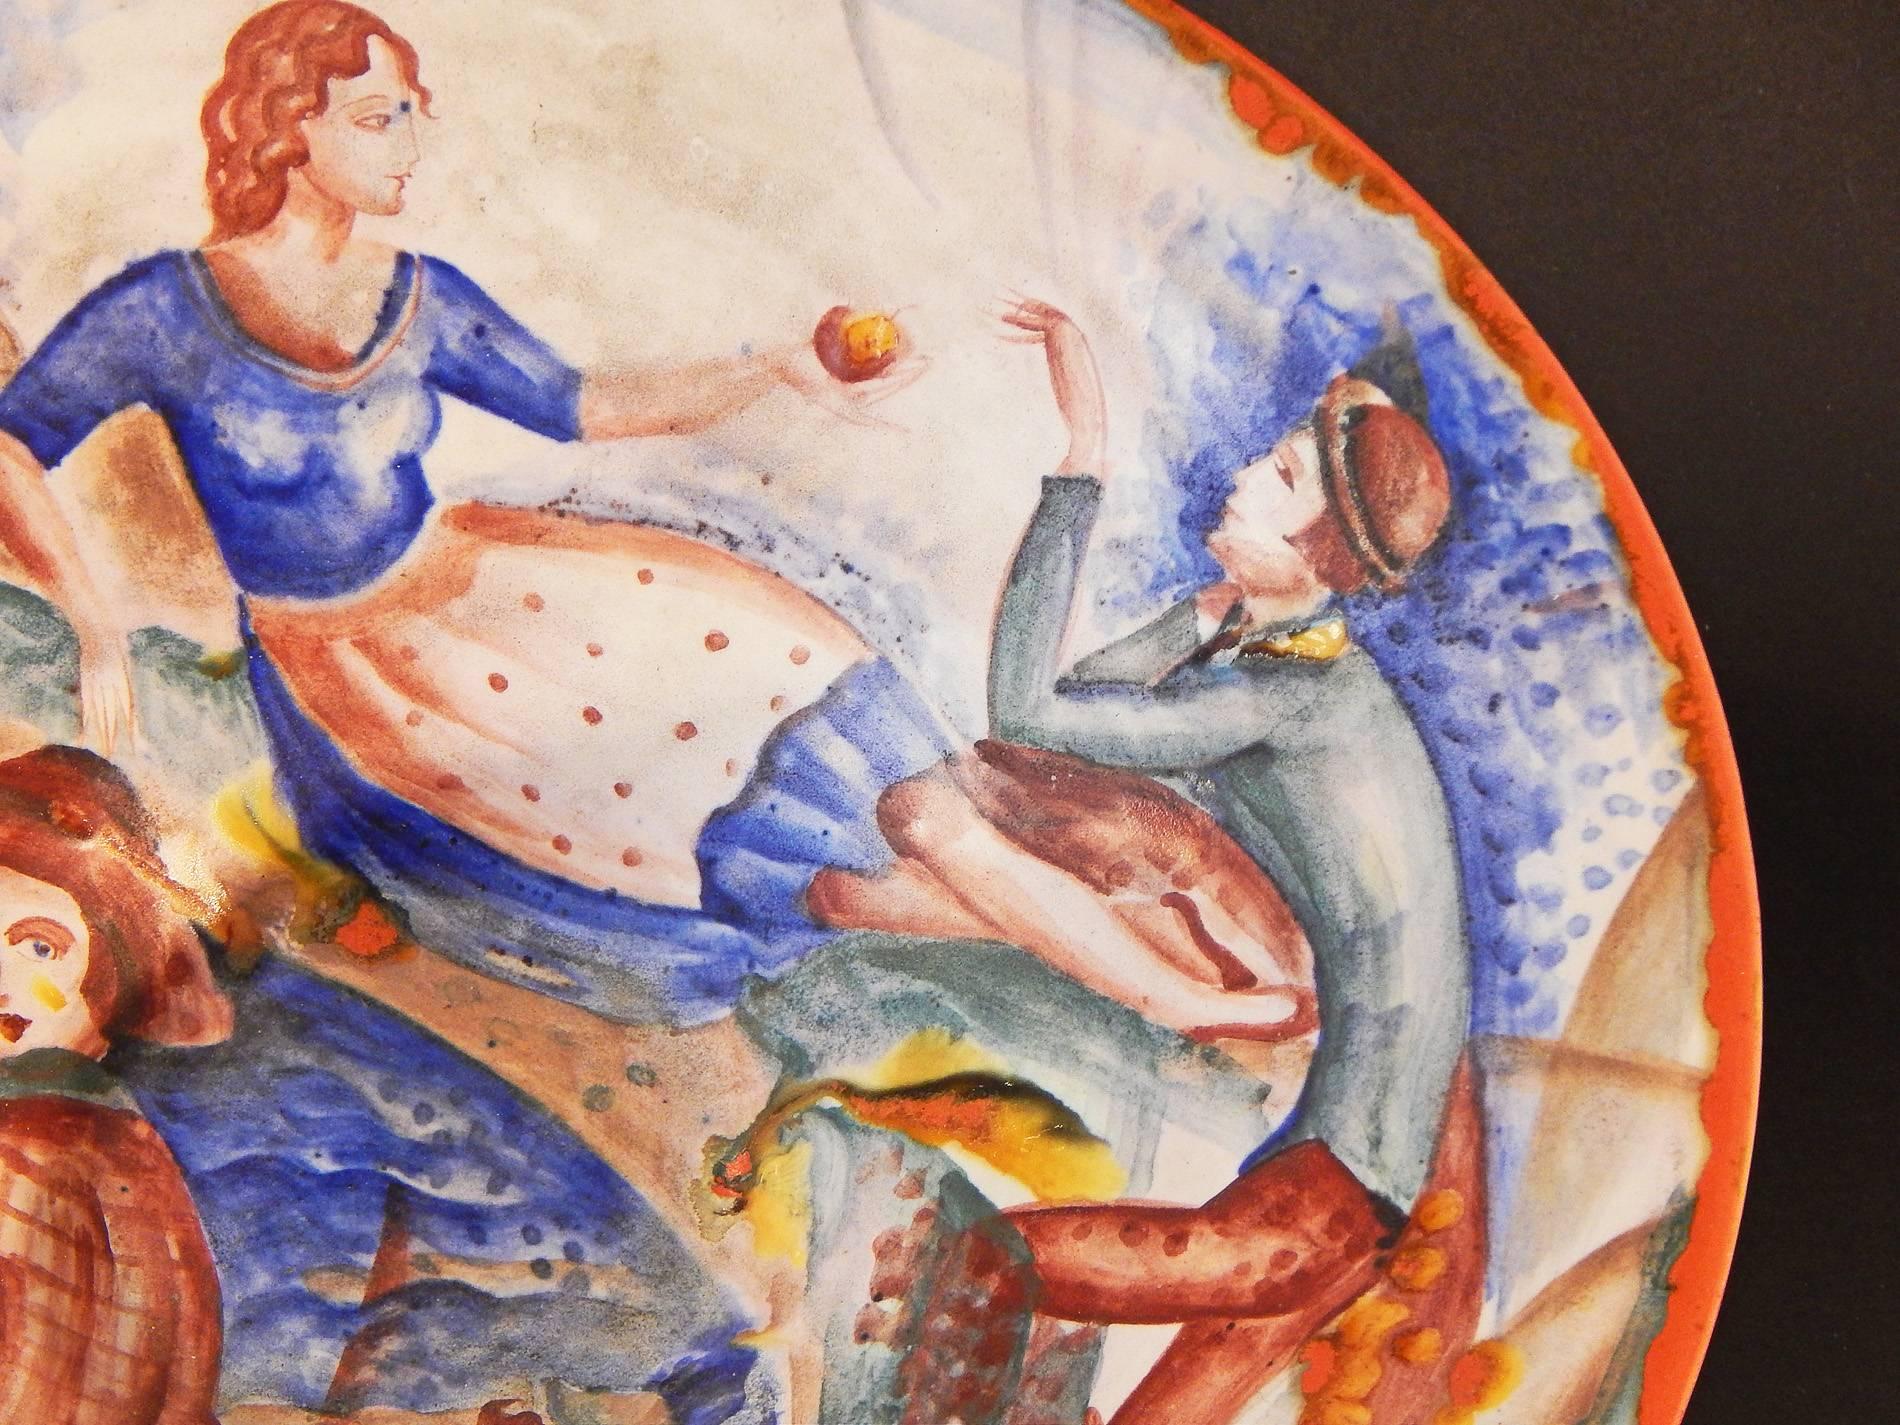 Whimsical and vividly glazed, this fabulous, unique Art Deco bowl depicts two contrasting scenes from a rural seaside village: a father and son fishing at the shore, and a young woman and man, the former offering a piece of fruit to the latter like